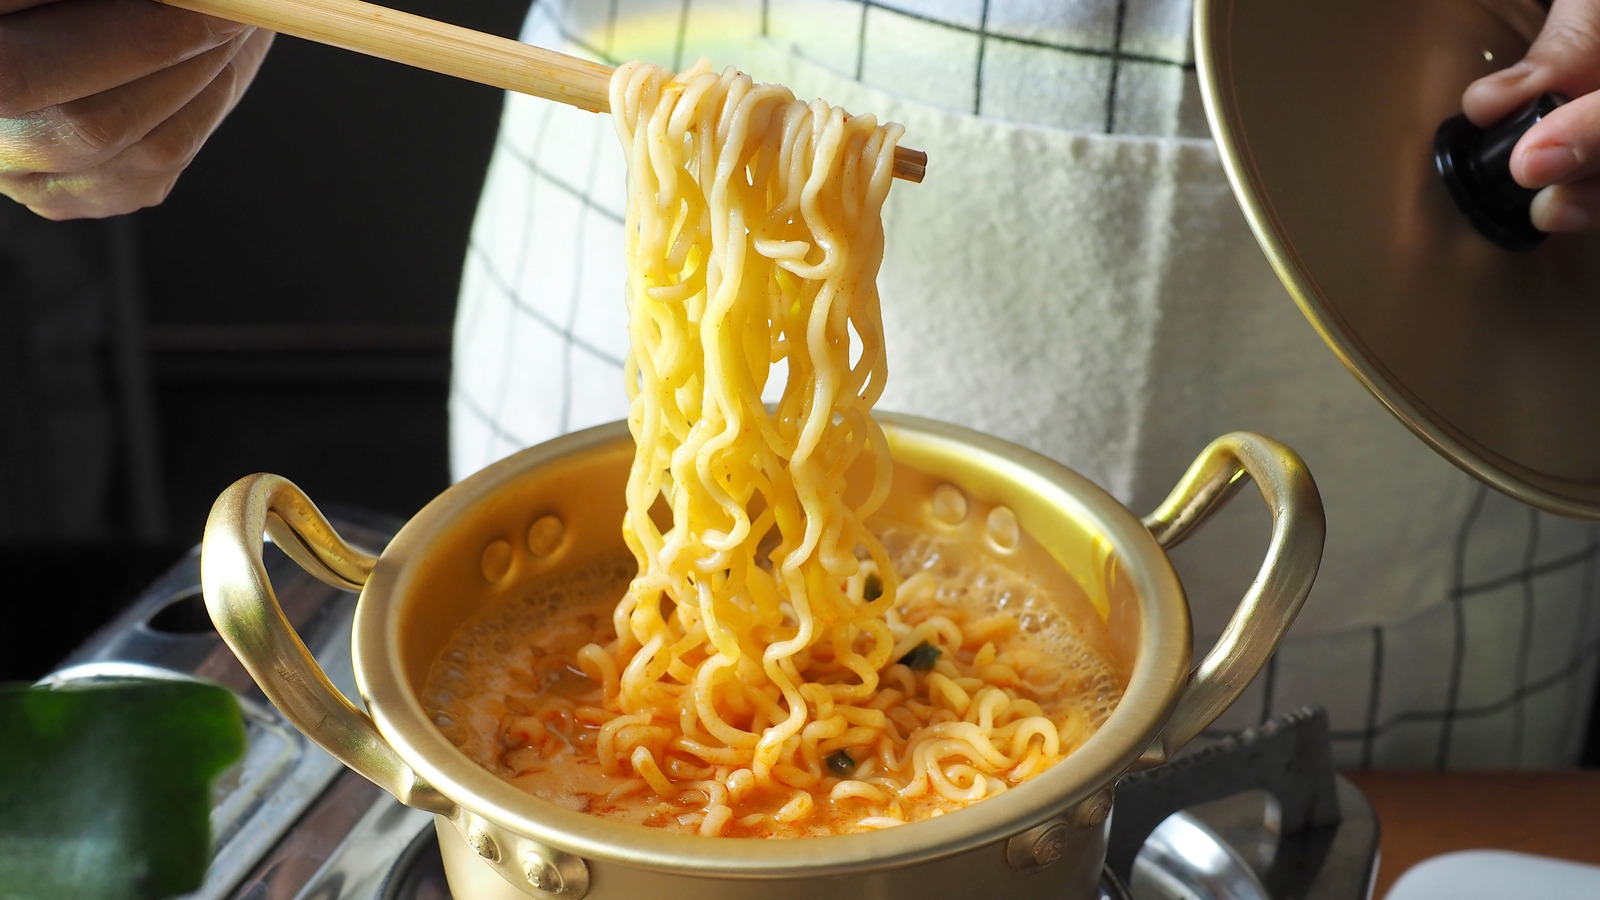 https://www.tastingtable.com/img/gallery/the-tiktok-instant-ramen-hack-that-will-help-you-get-a-quick-meal/l-intro-1646948388.jpg